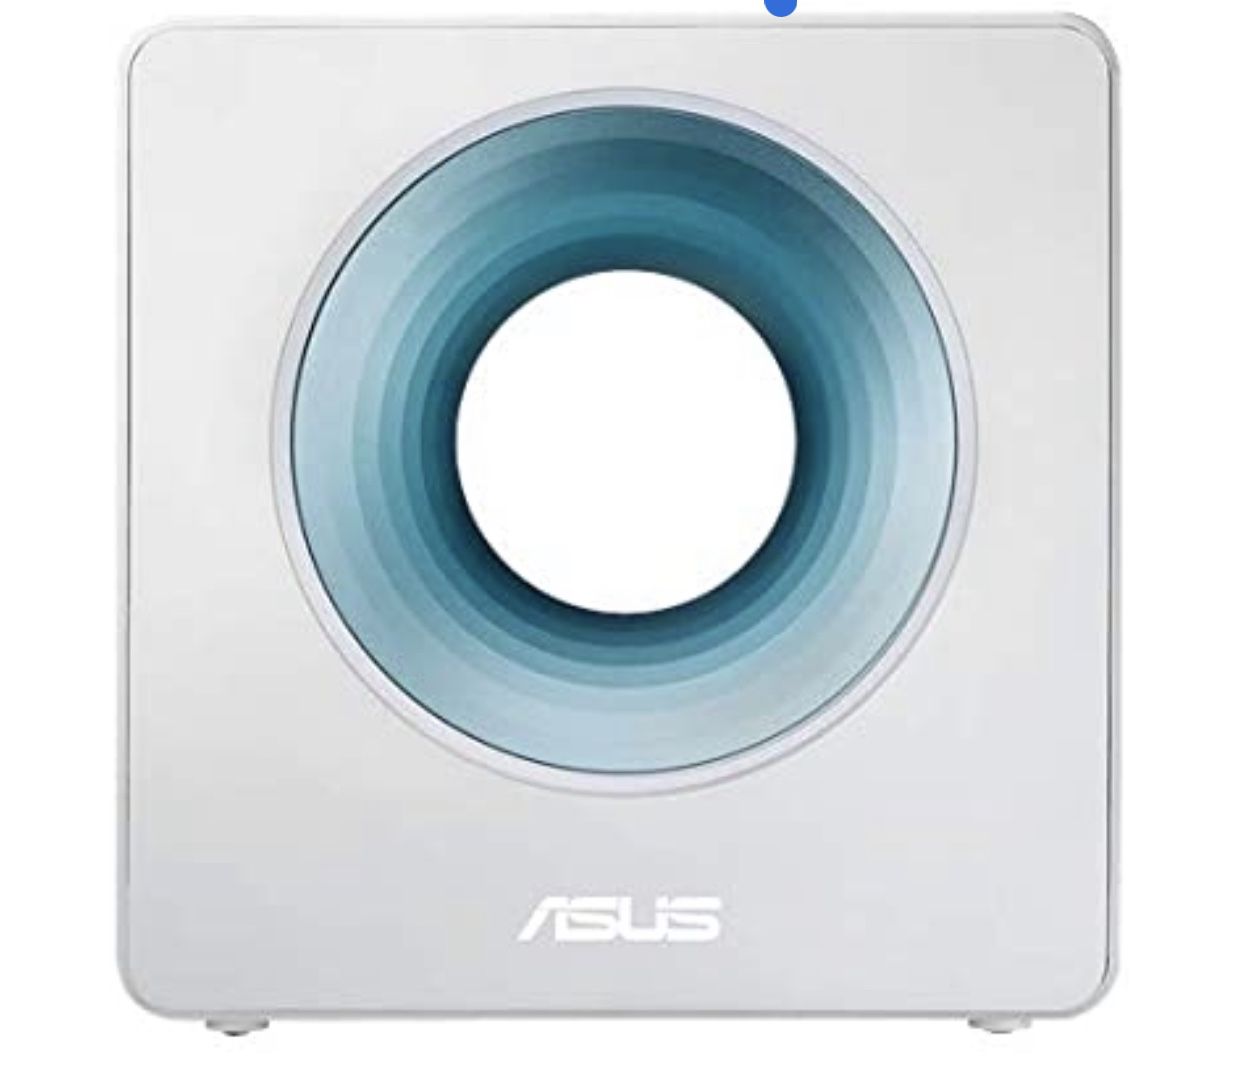 Asus Blue Cave AC2600 Dual-Band Wireless Router for Smart Homes, Featuring Intel Wifi Technology and Aiprotection Network Security Powered by Trend M